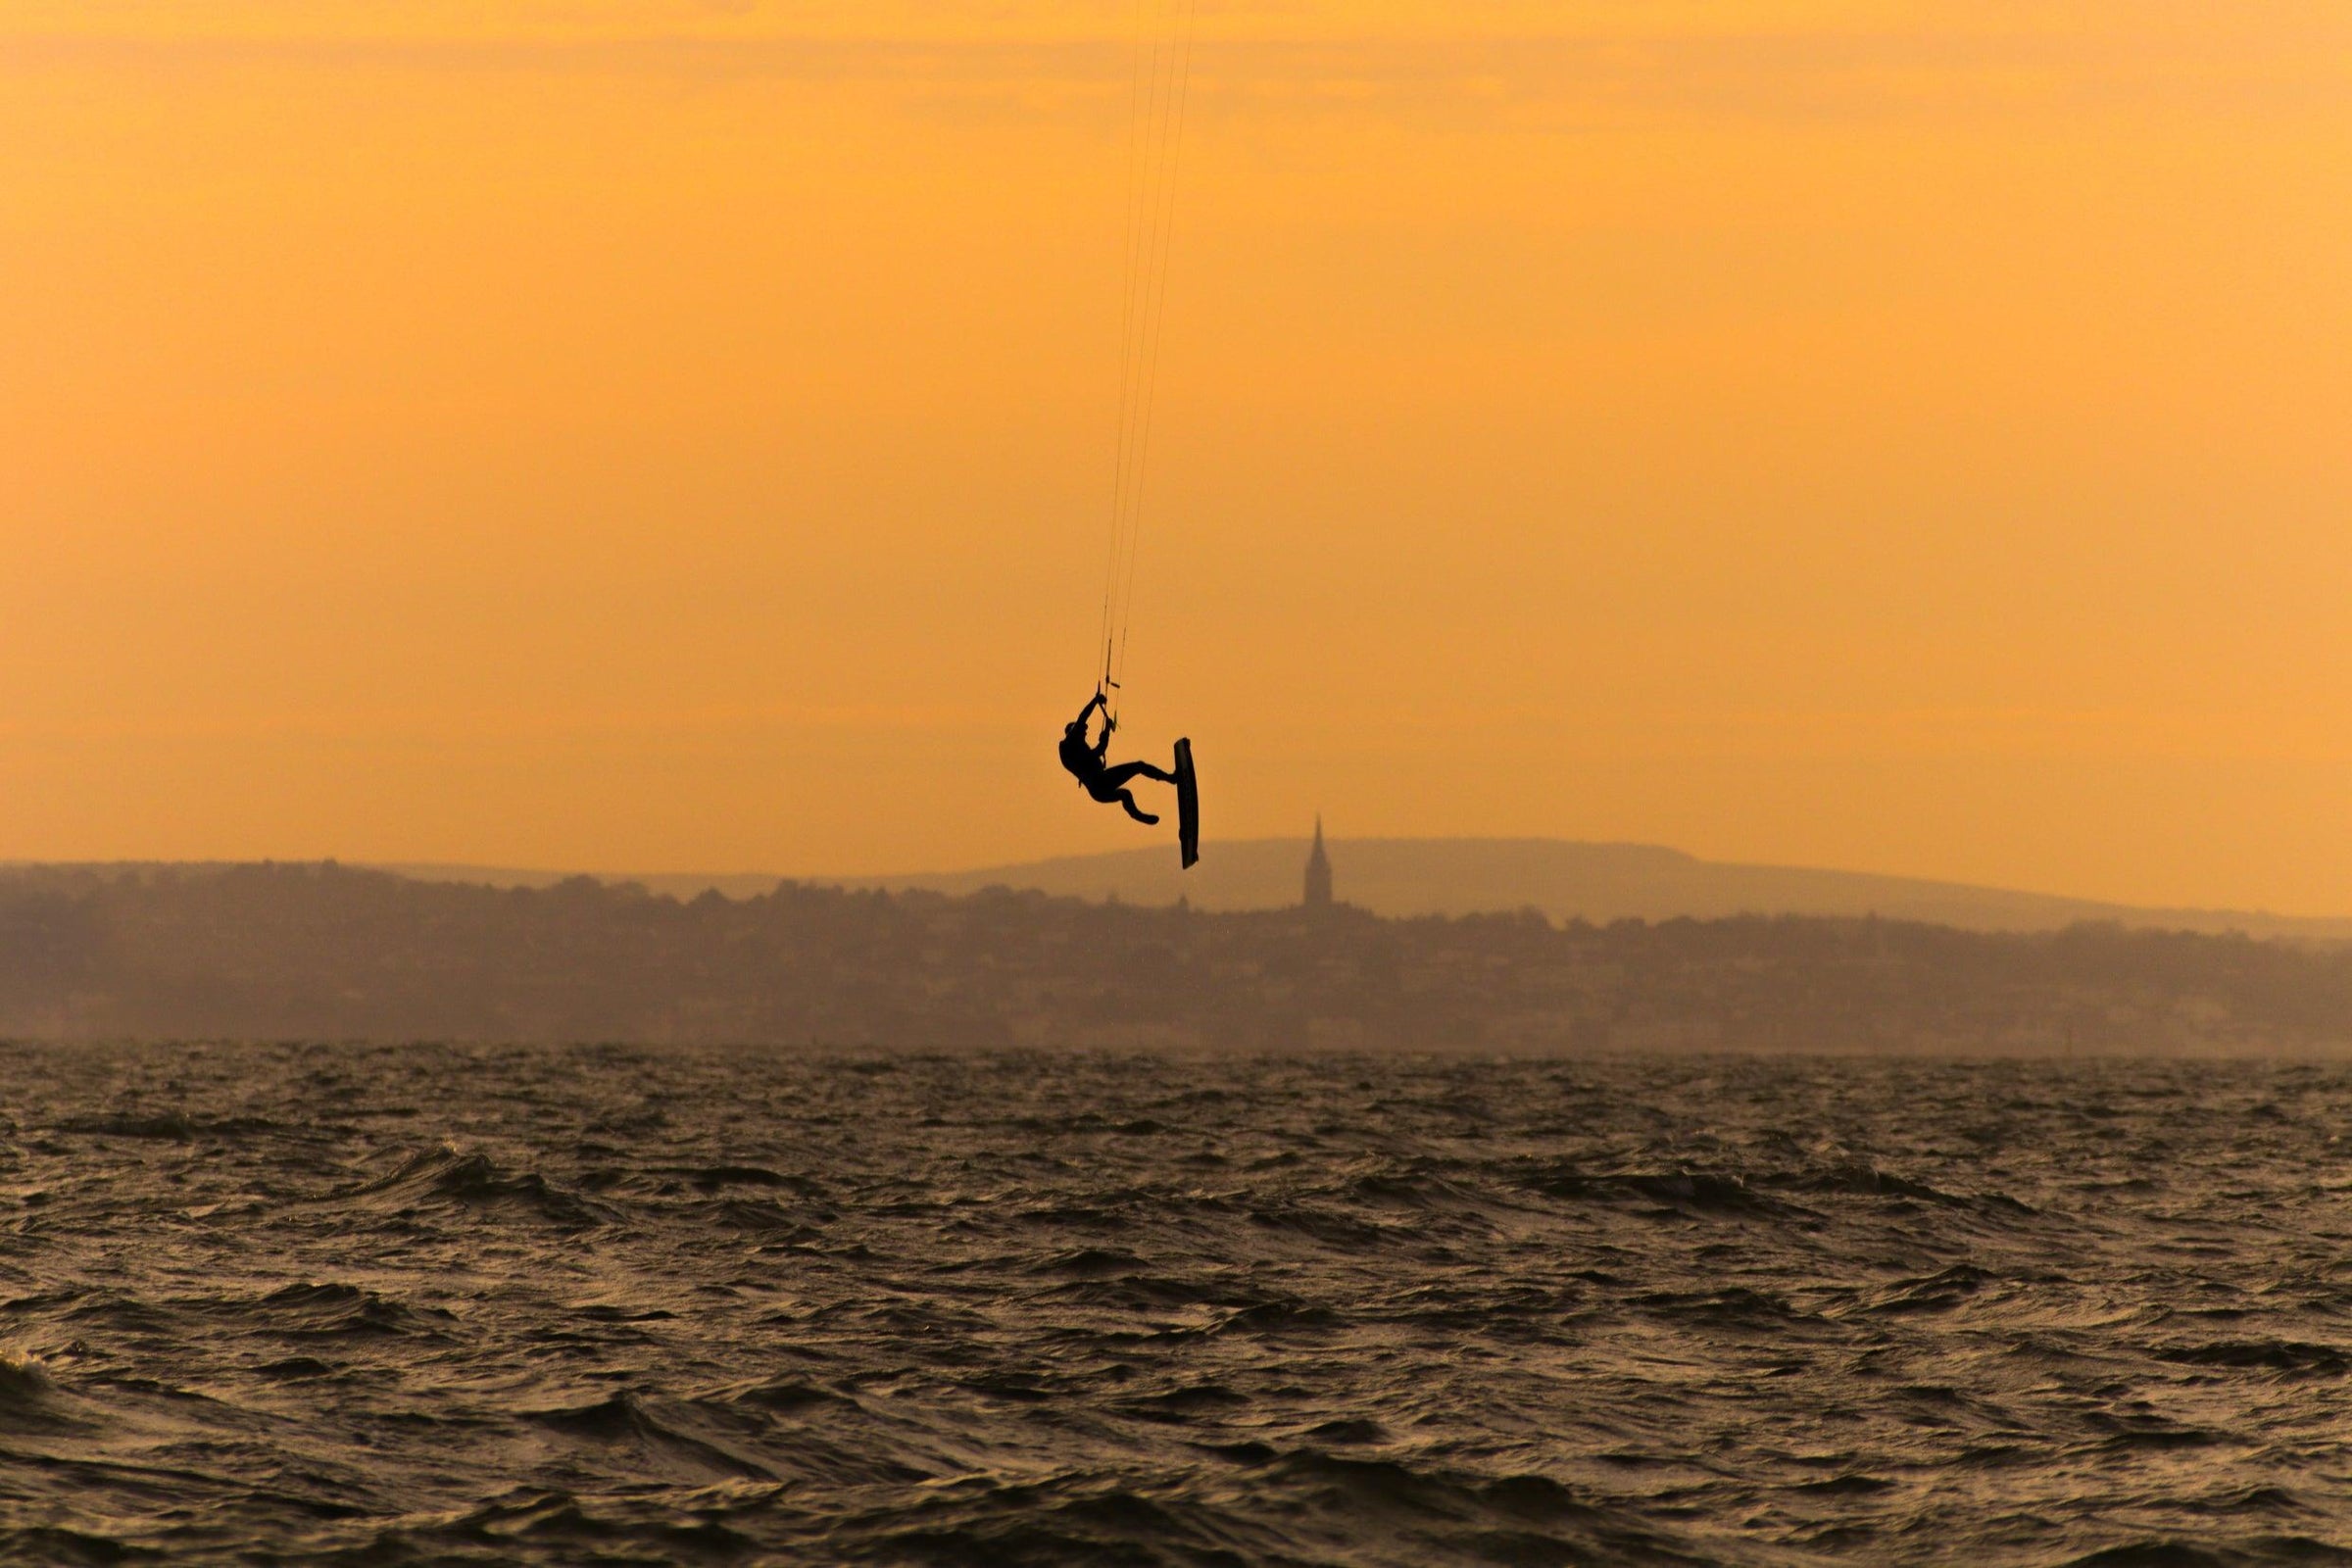 silhouette-of-a-person-kite-surfing-in-wavy-water - Ready Sweat Go